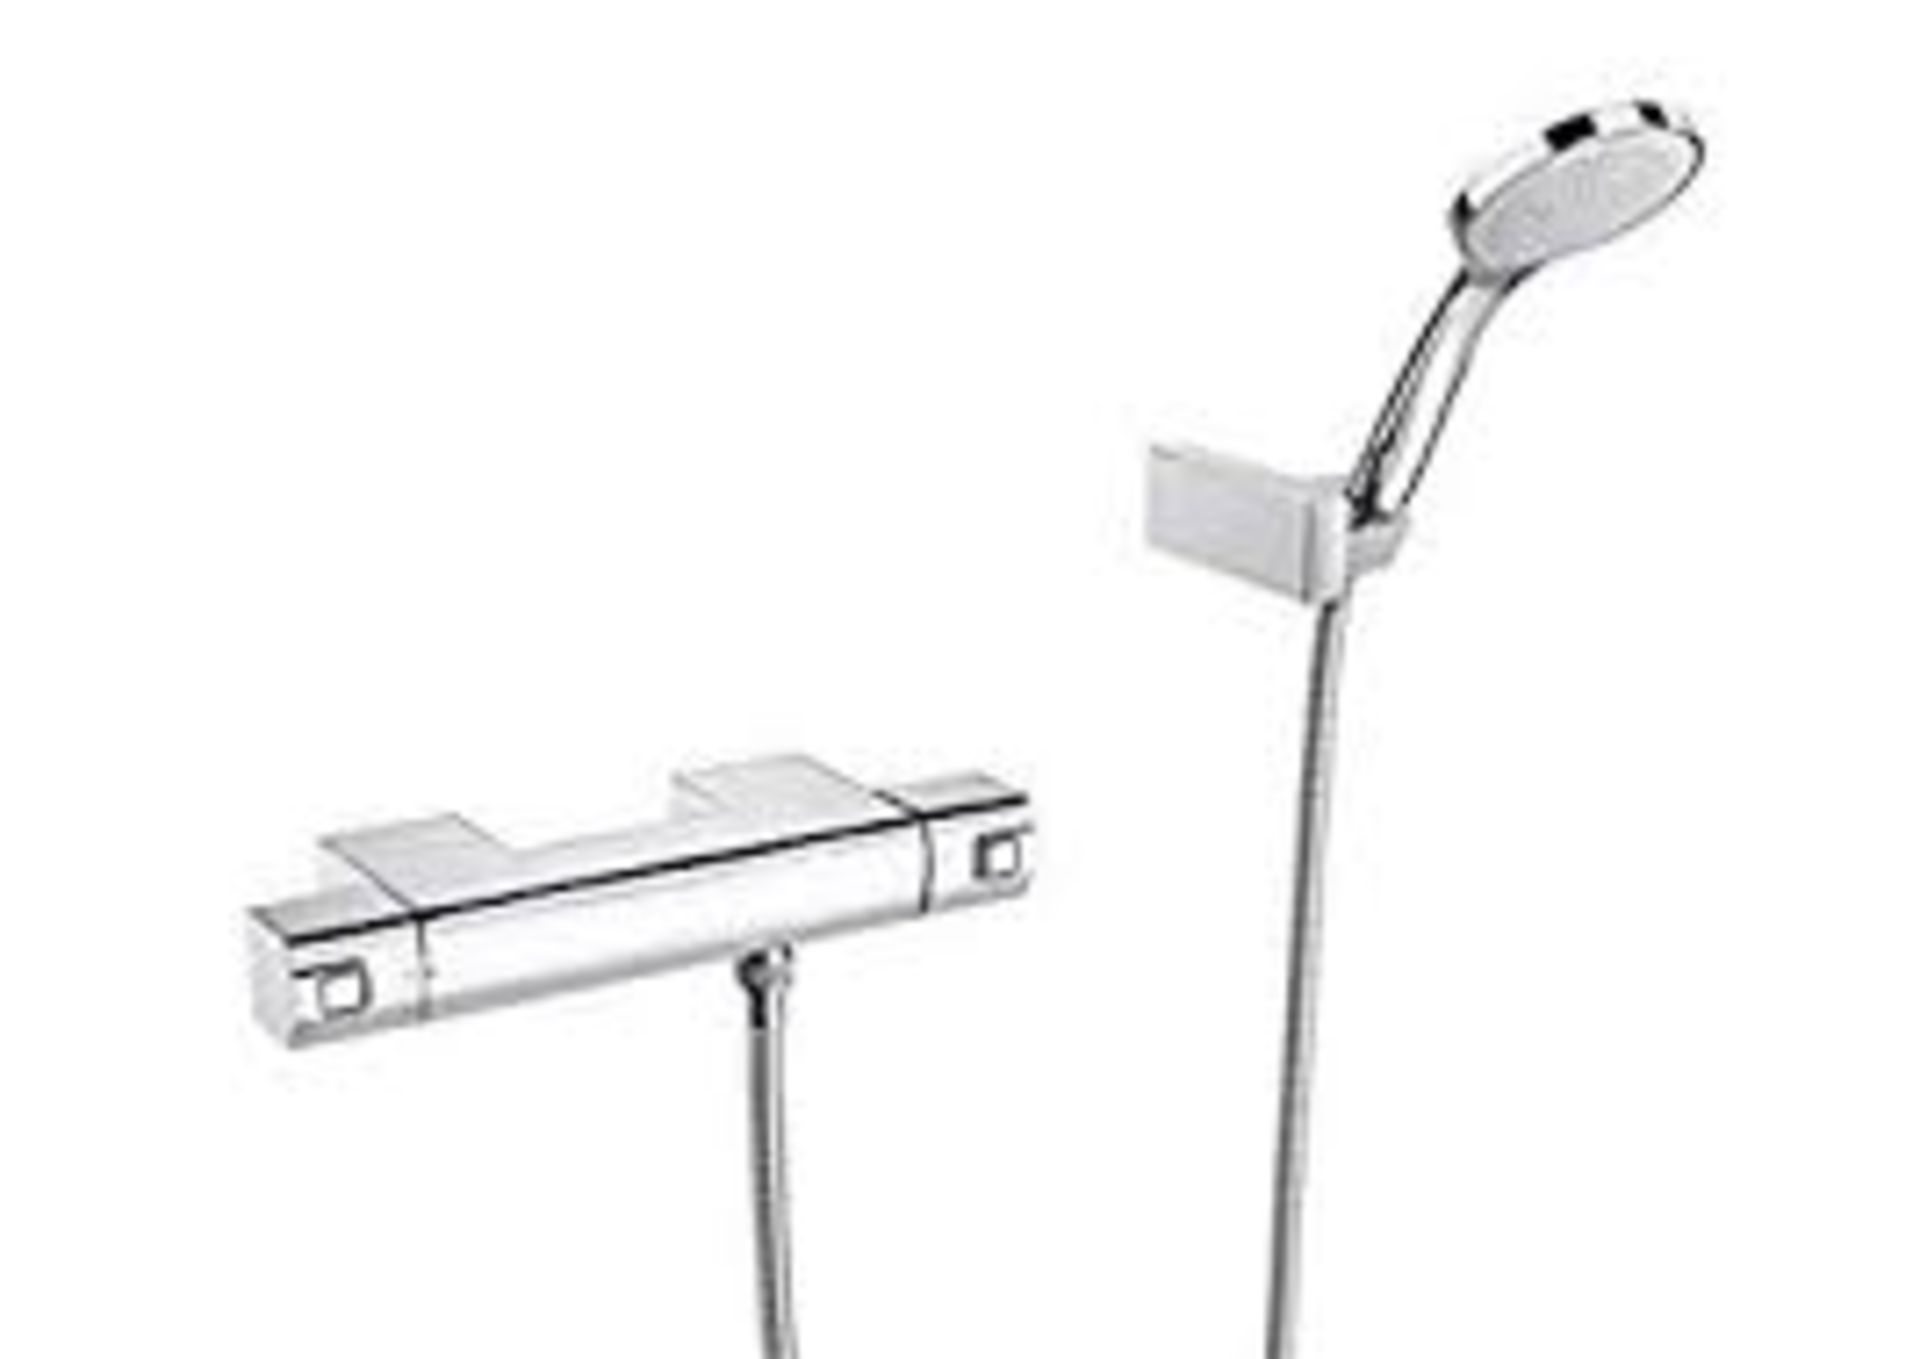 Roca L90-T thermostatic shower bar valve with handset, new and still sealed, RRP £220